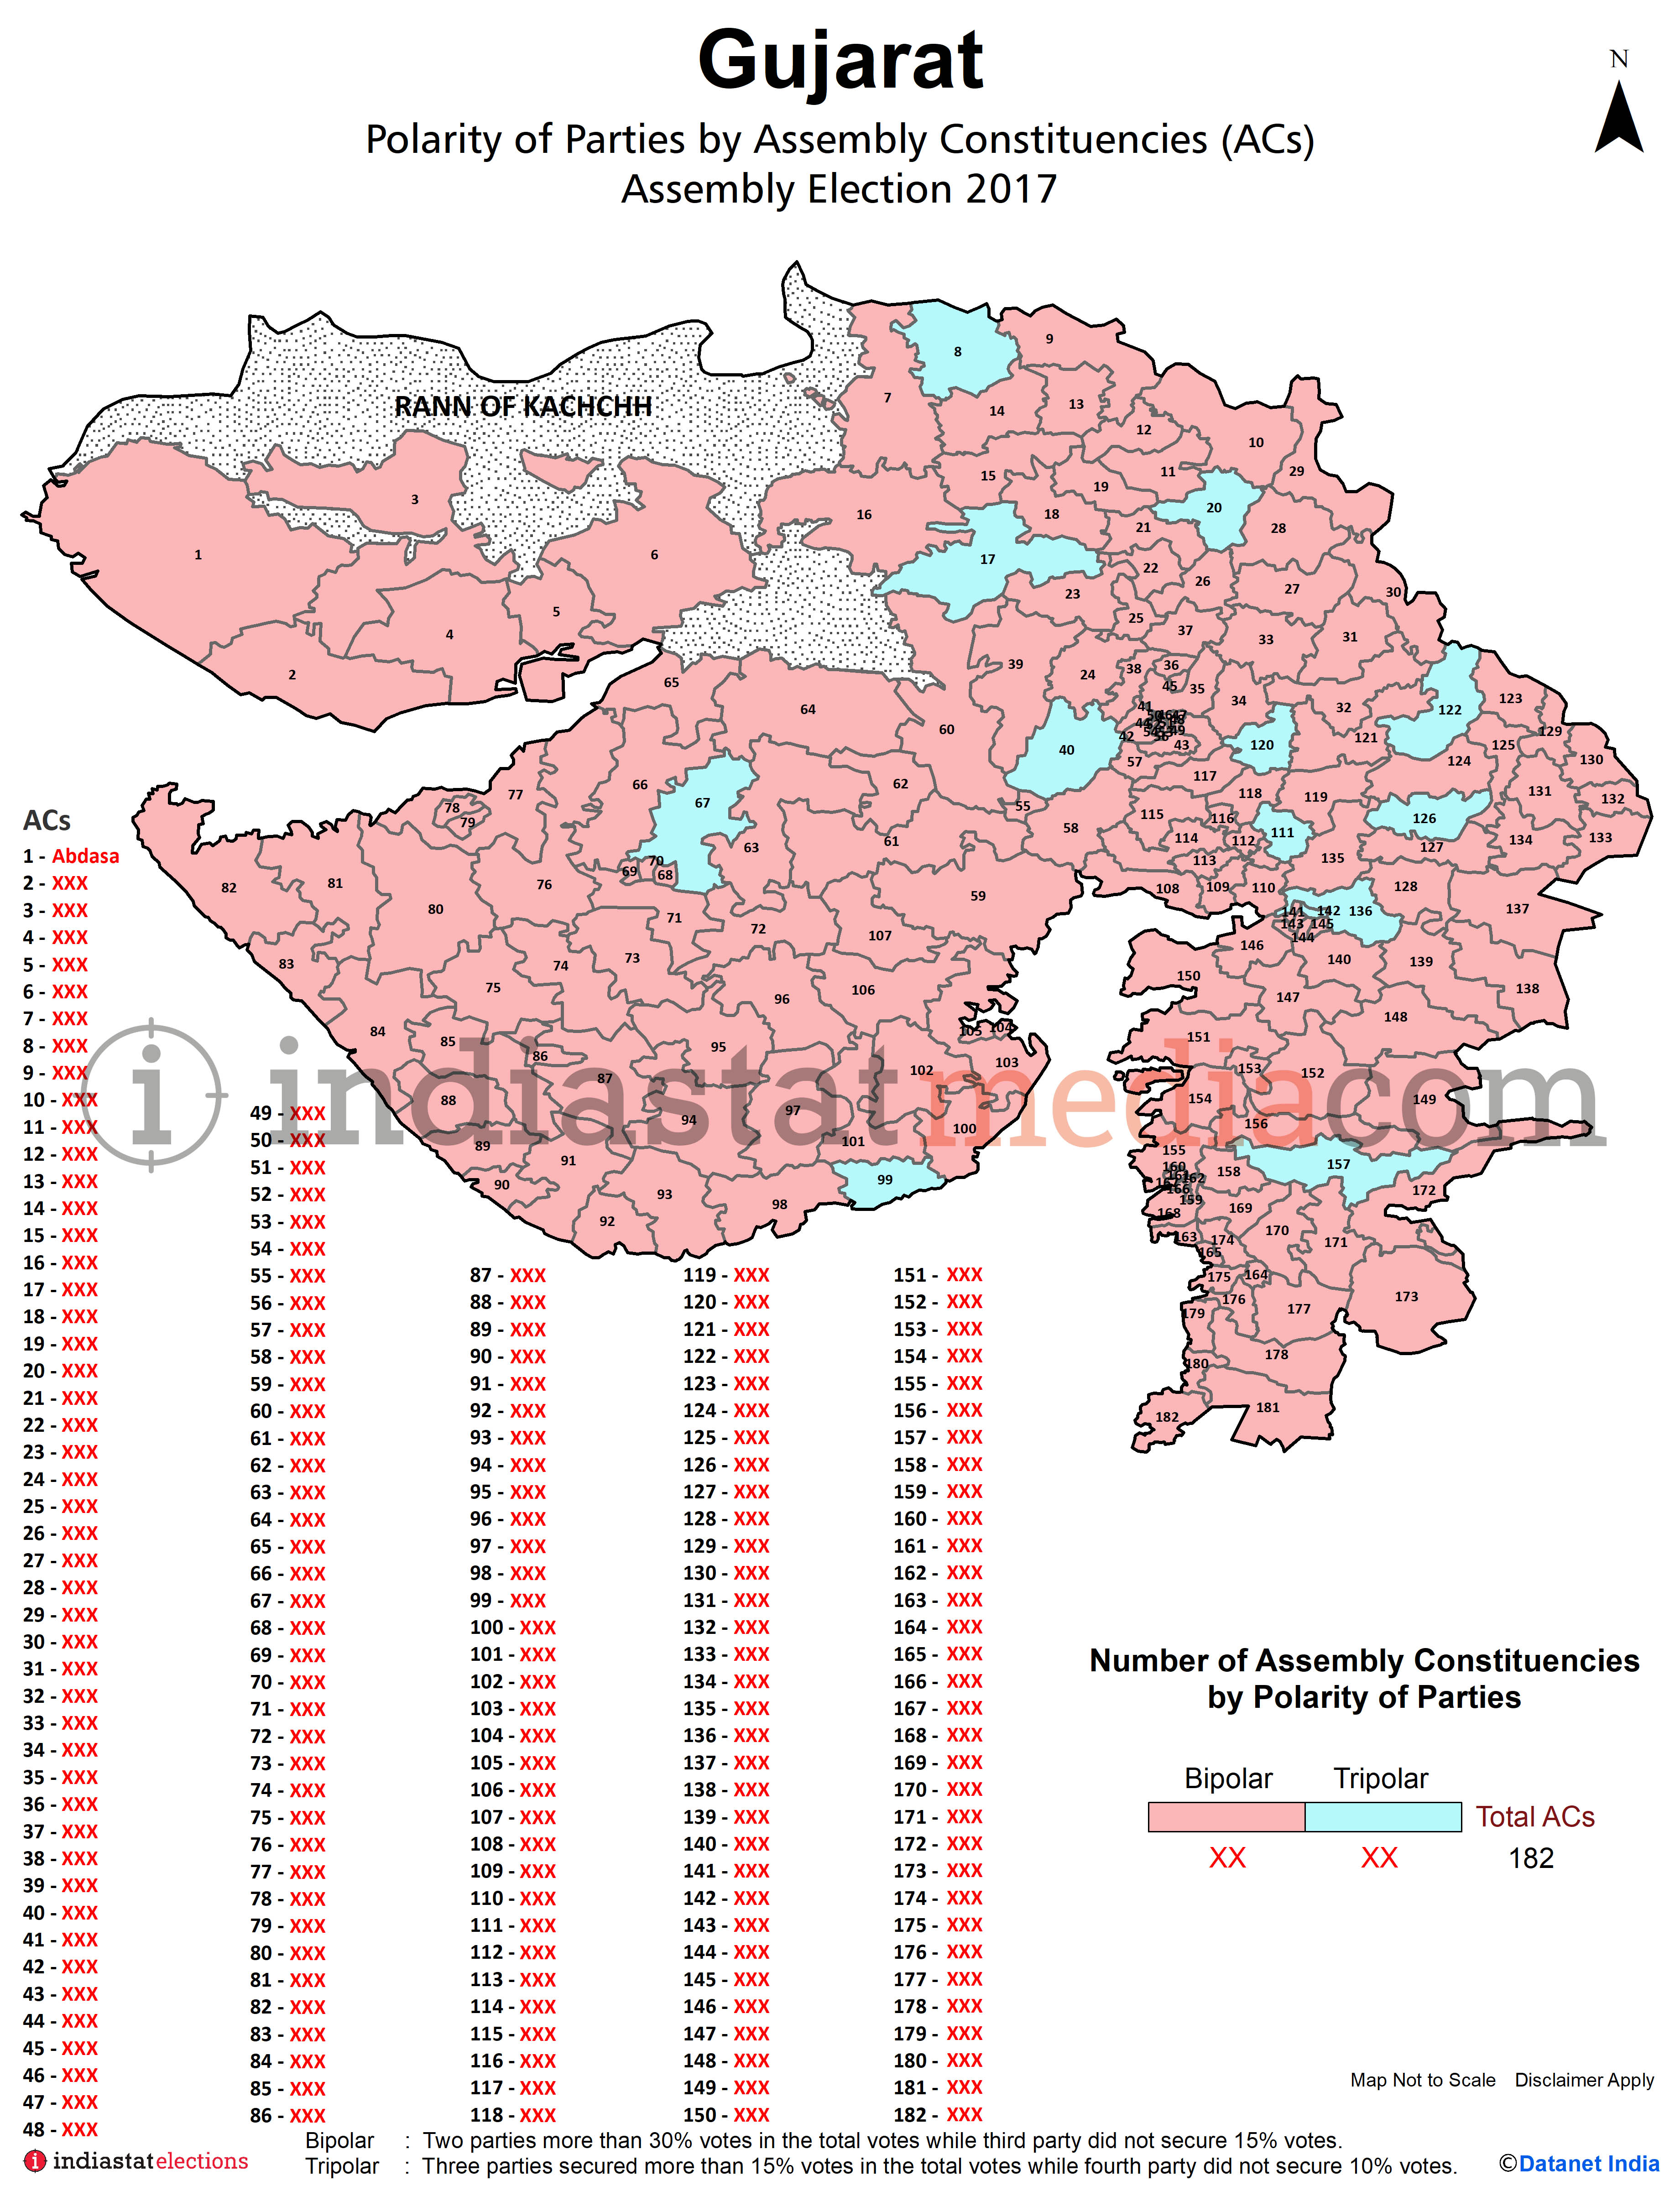 Polarity of Parties by Assembly Constituencies in Gujarat Assembly Election - 2017